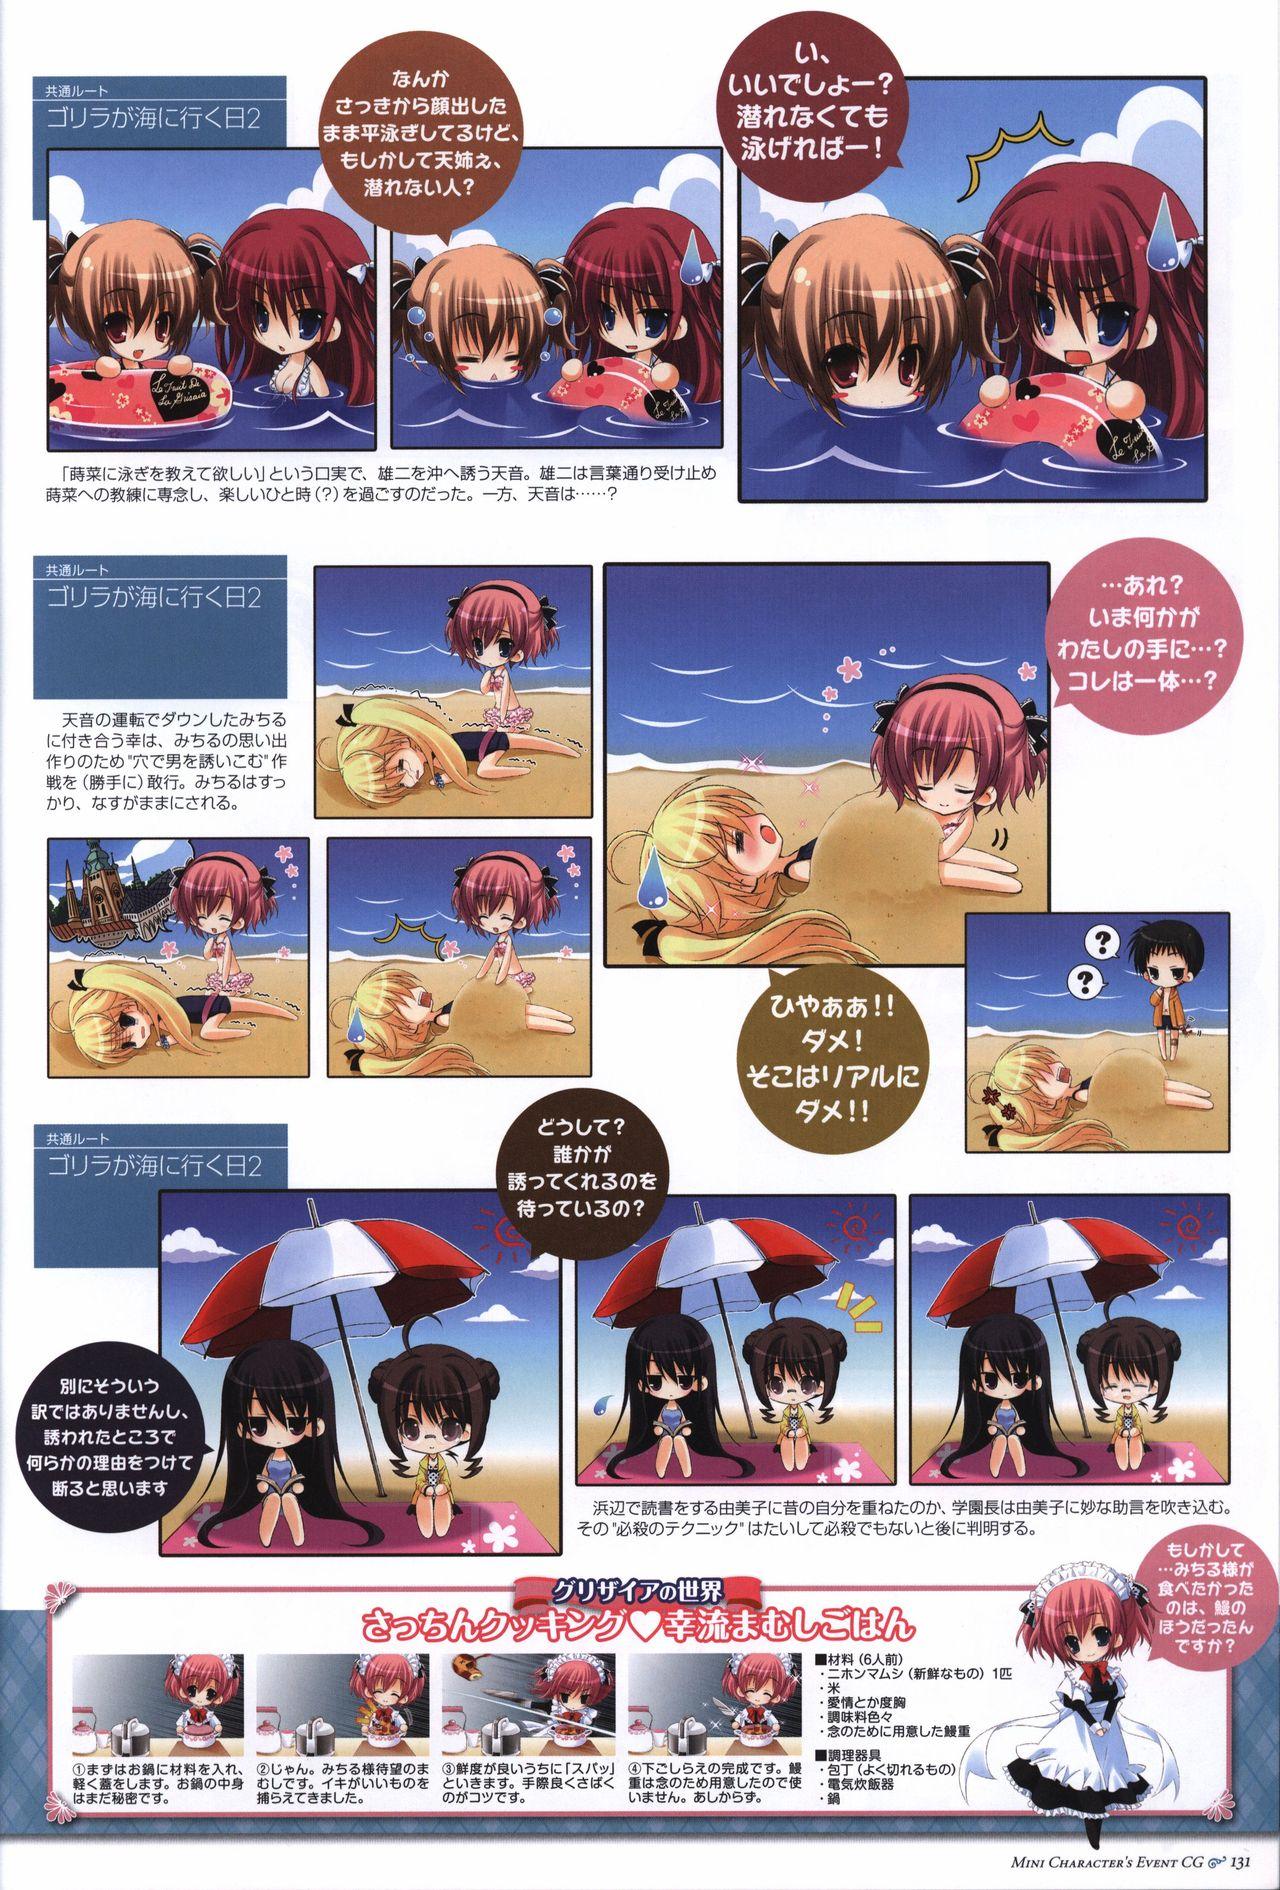 The Fruit of Grisaia Visual FanBook 131